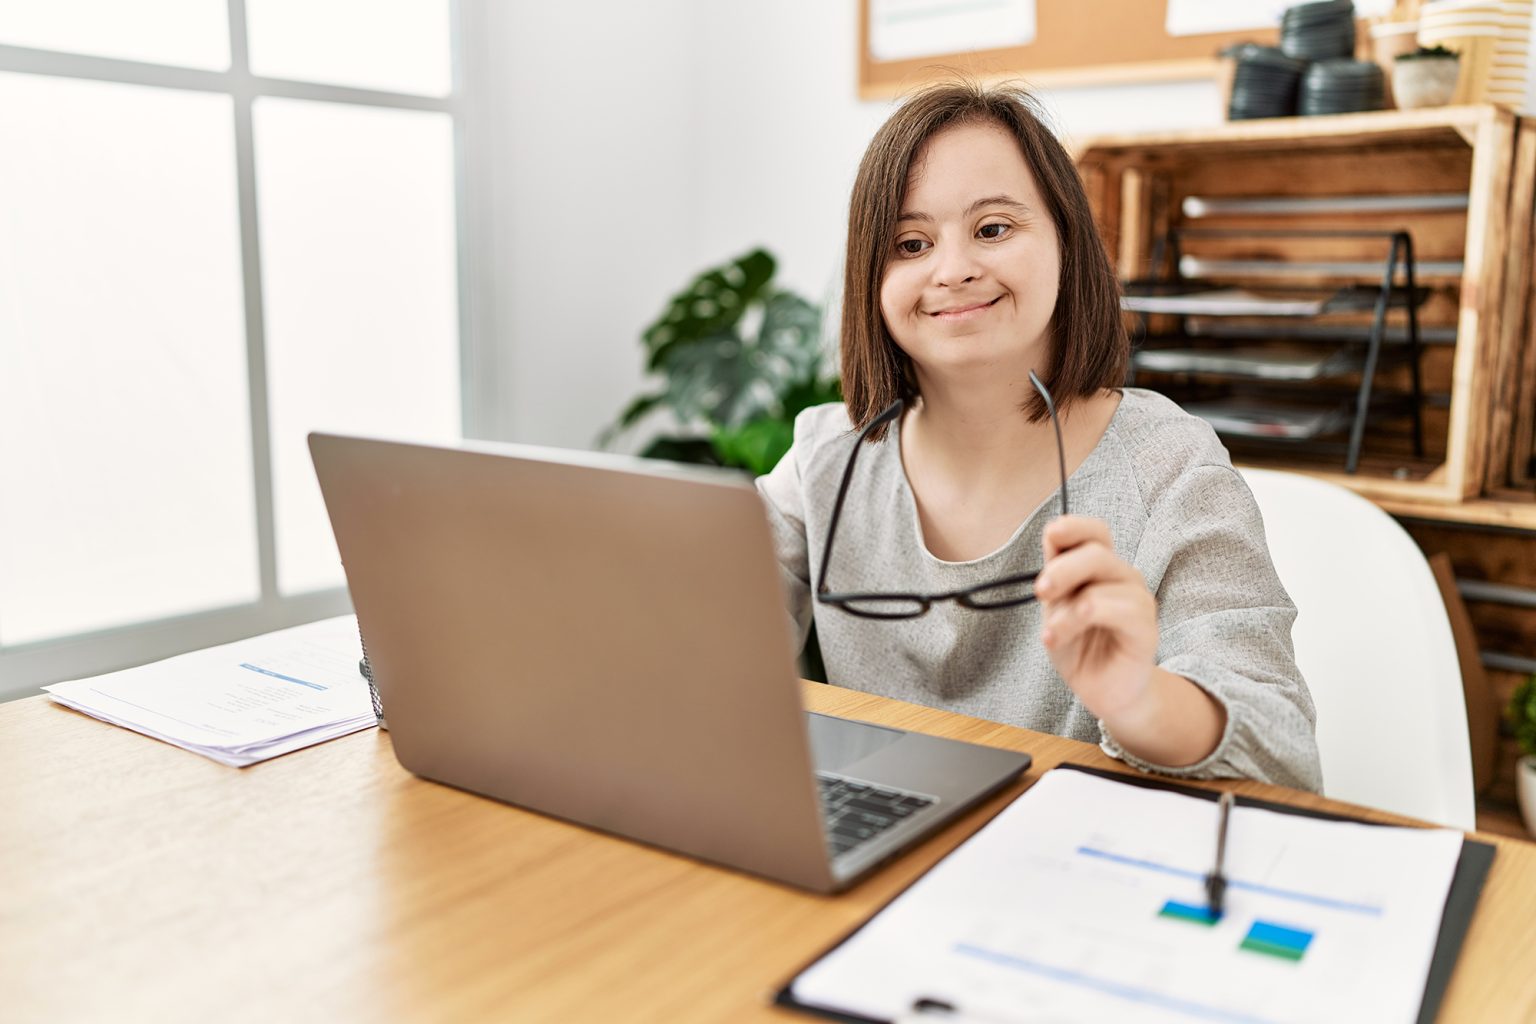 Brunette woman with down syndrome working using laptop at business office